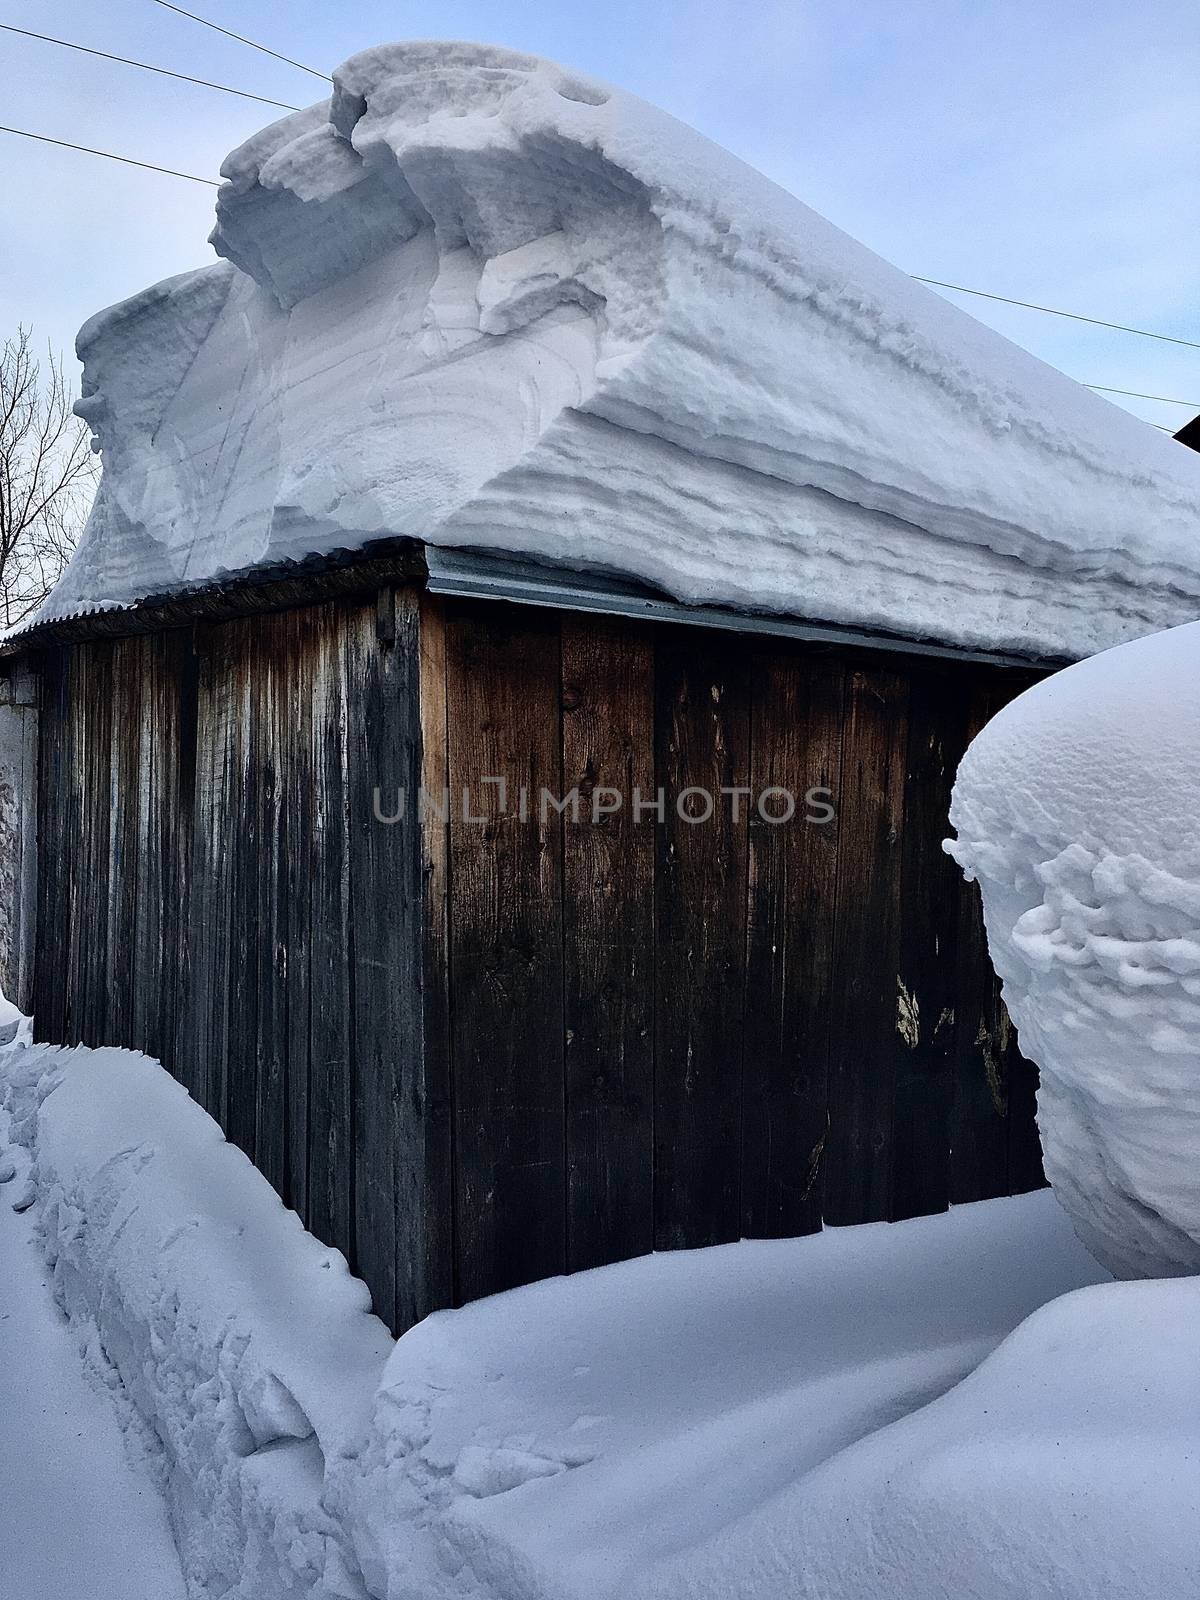 A lot of snow on the roof of the house and buildings. Winter in the country and in the city. The sun shines on the snow of the hemisphere curve, and the snow on the roof of the winter house is thick,